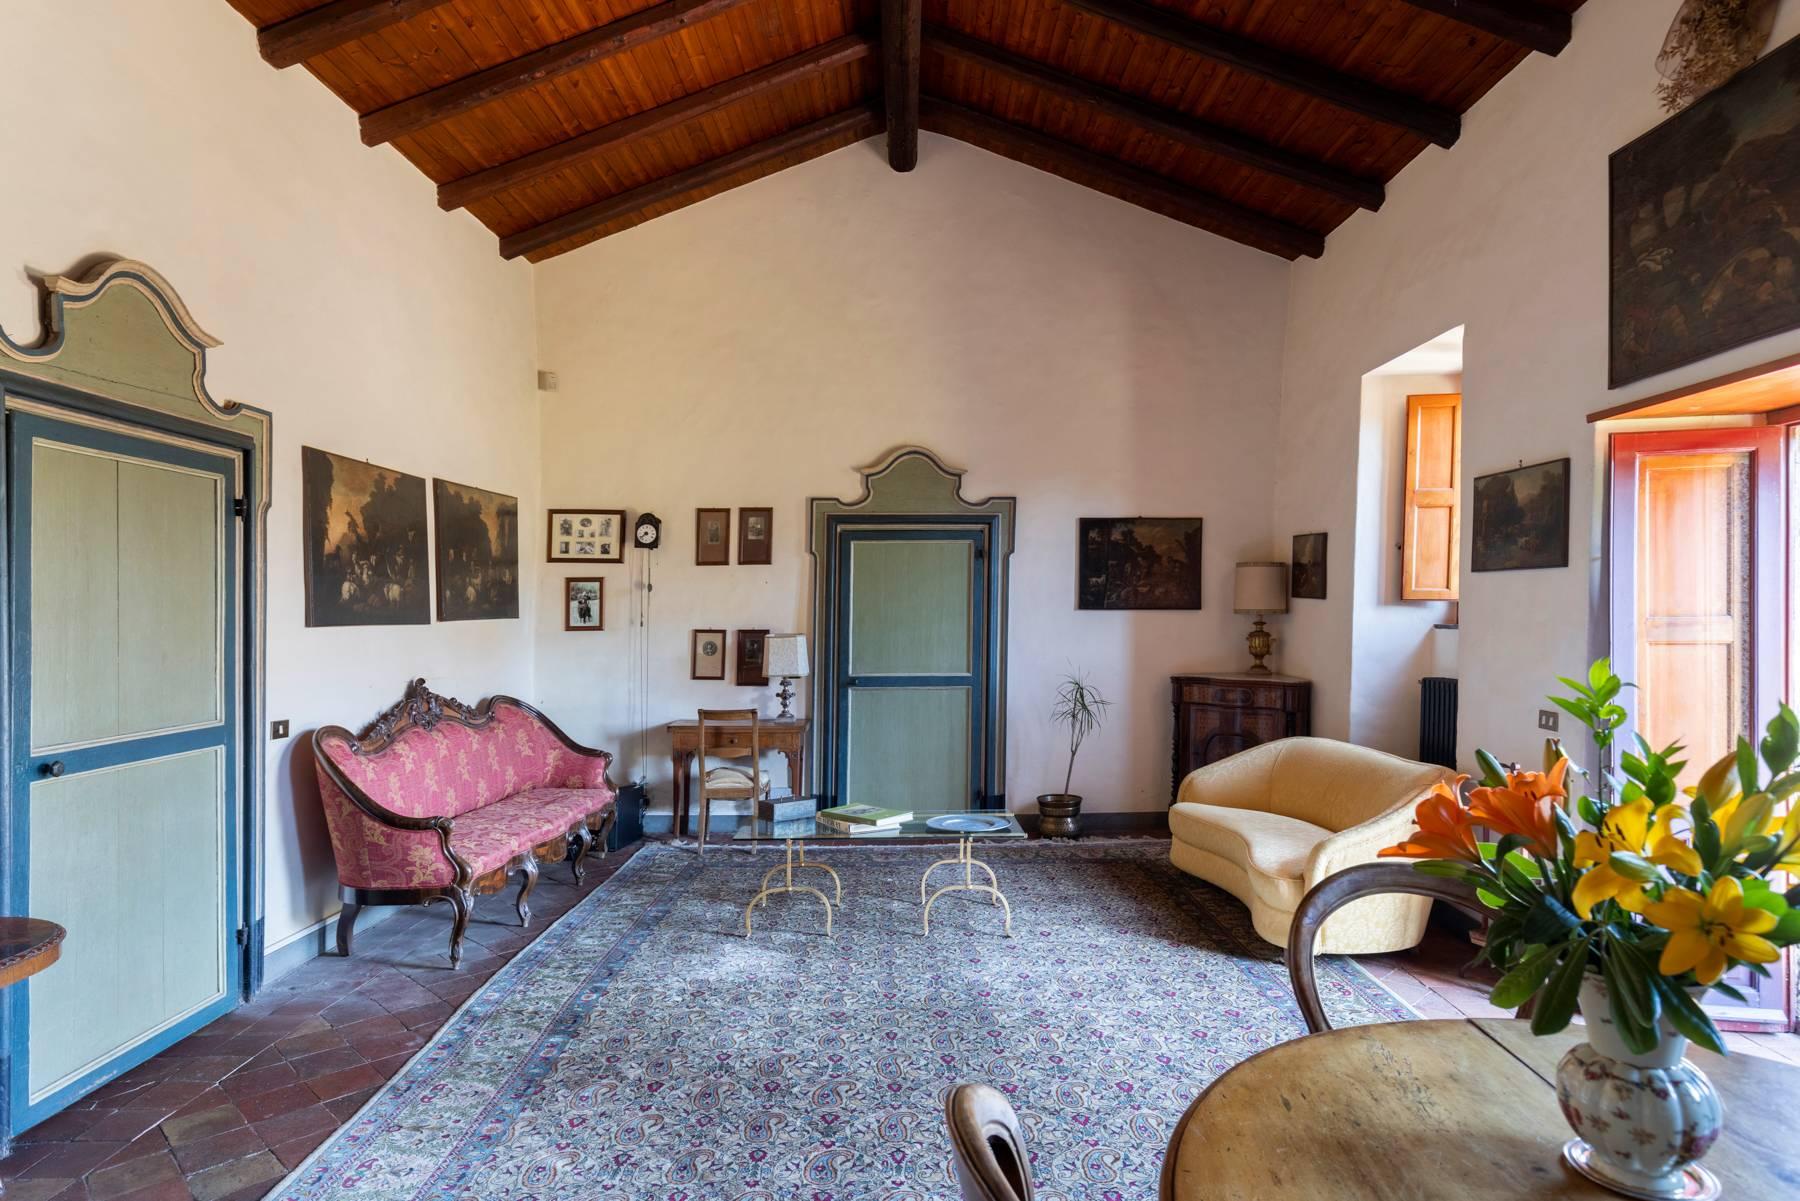 Renovated 18th-century Sicilian house at the foot of Volcano Etna - 24